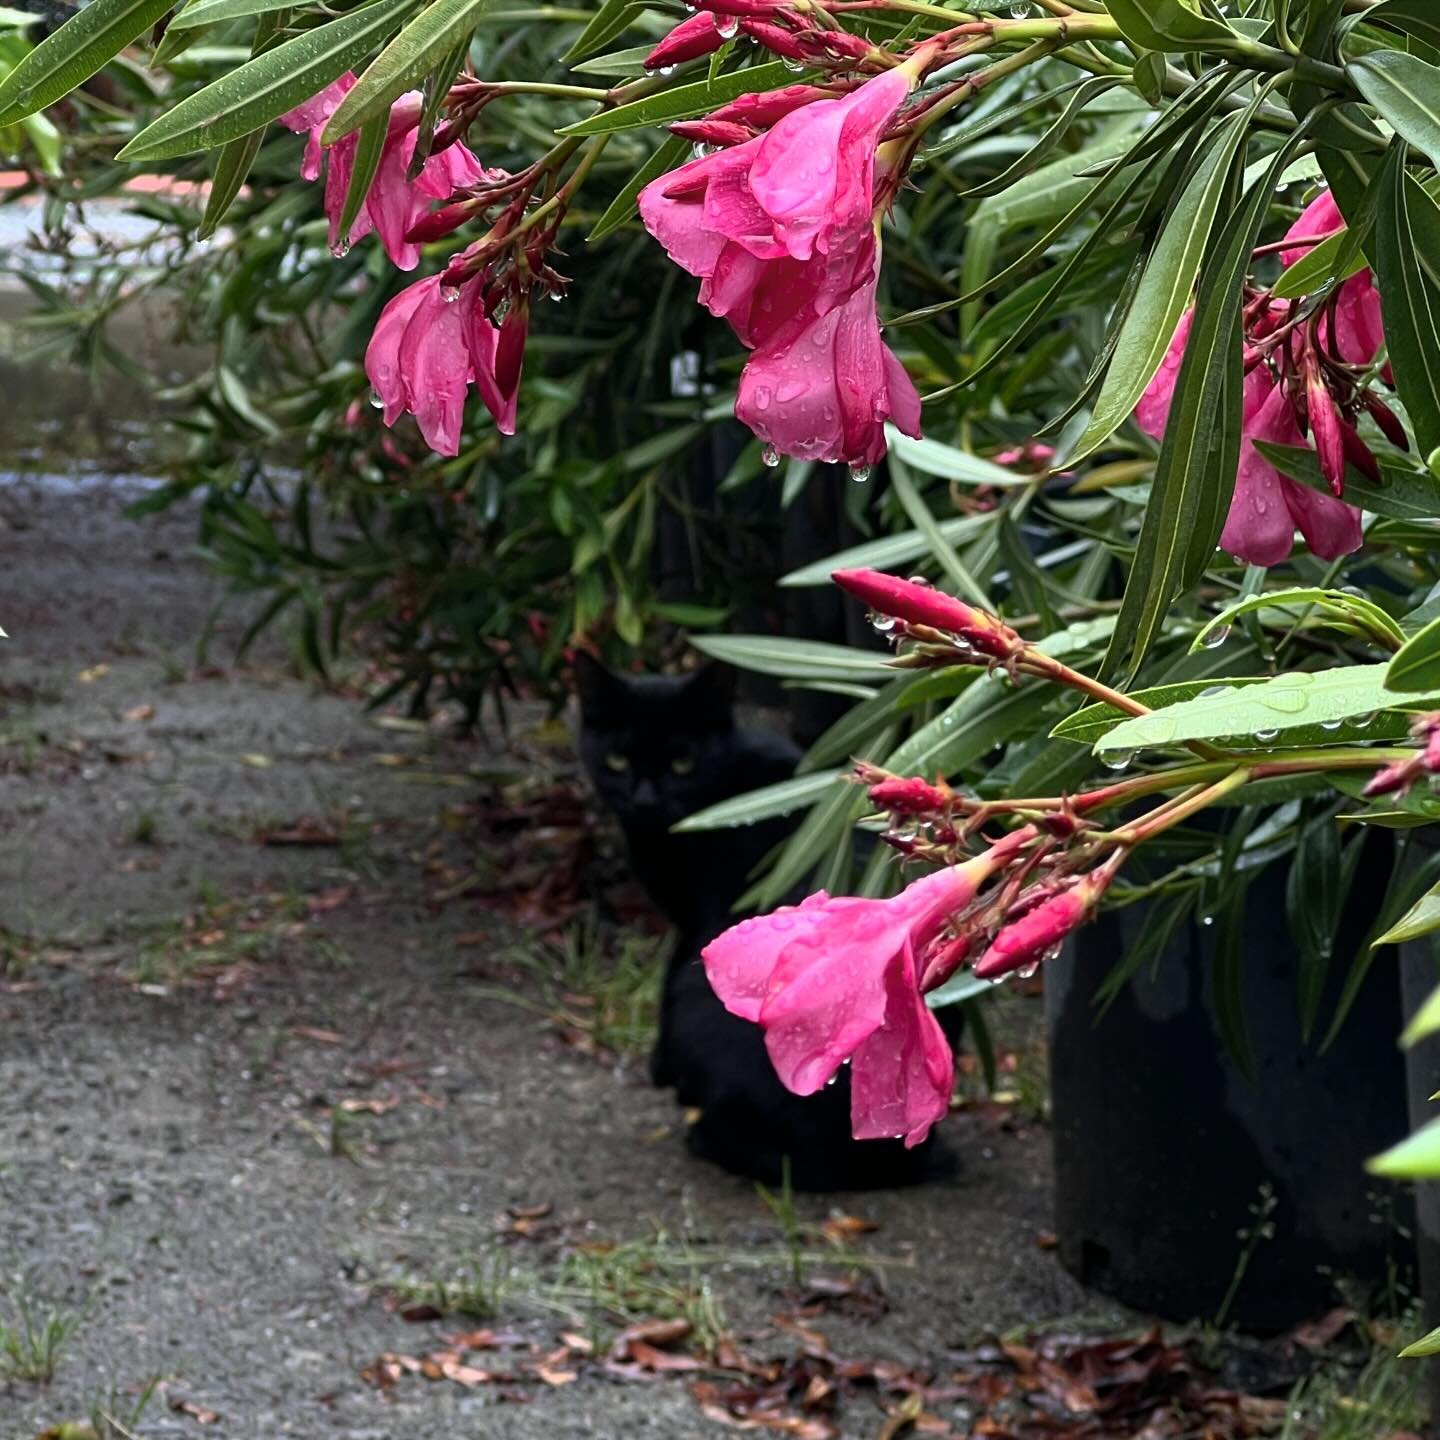 Little furry one spotted puddle-jumping after the rain ☔️🐈&zwj;⬛🌸 Look how his lil paws are raised up off the wet ground! 

#capitolwholesalenursery #catstagram #rainysaturday #sanjosecalifornia